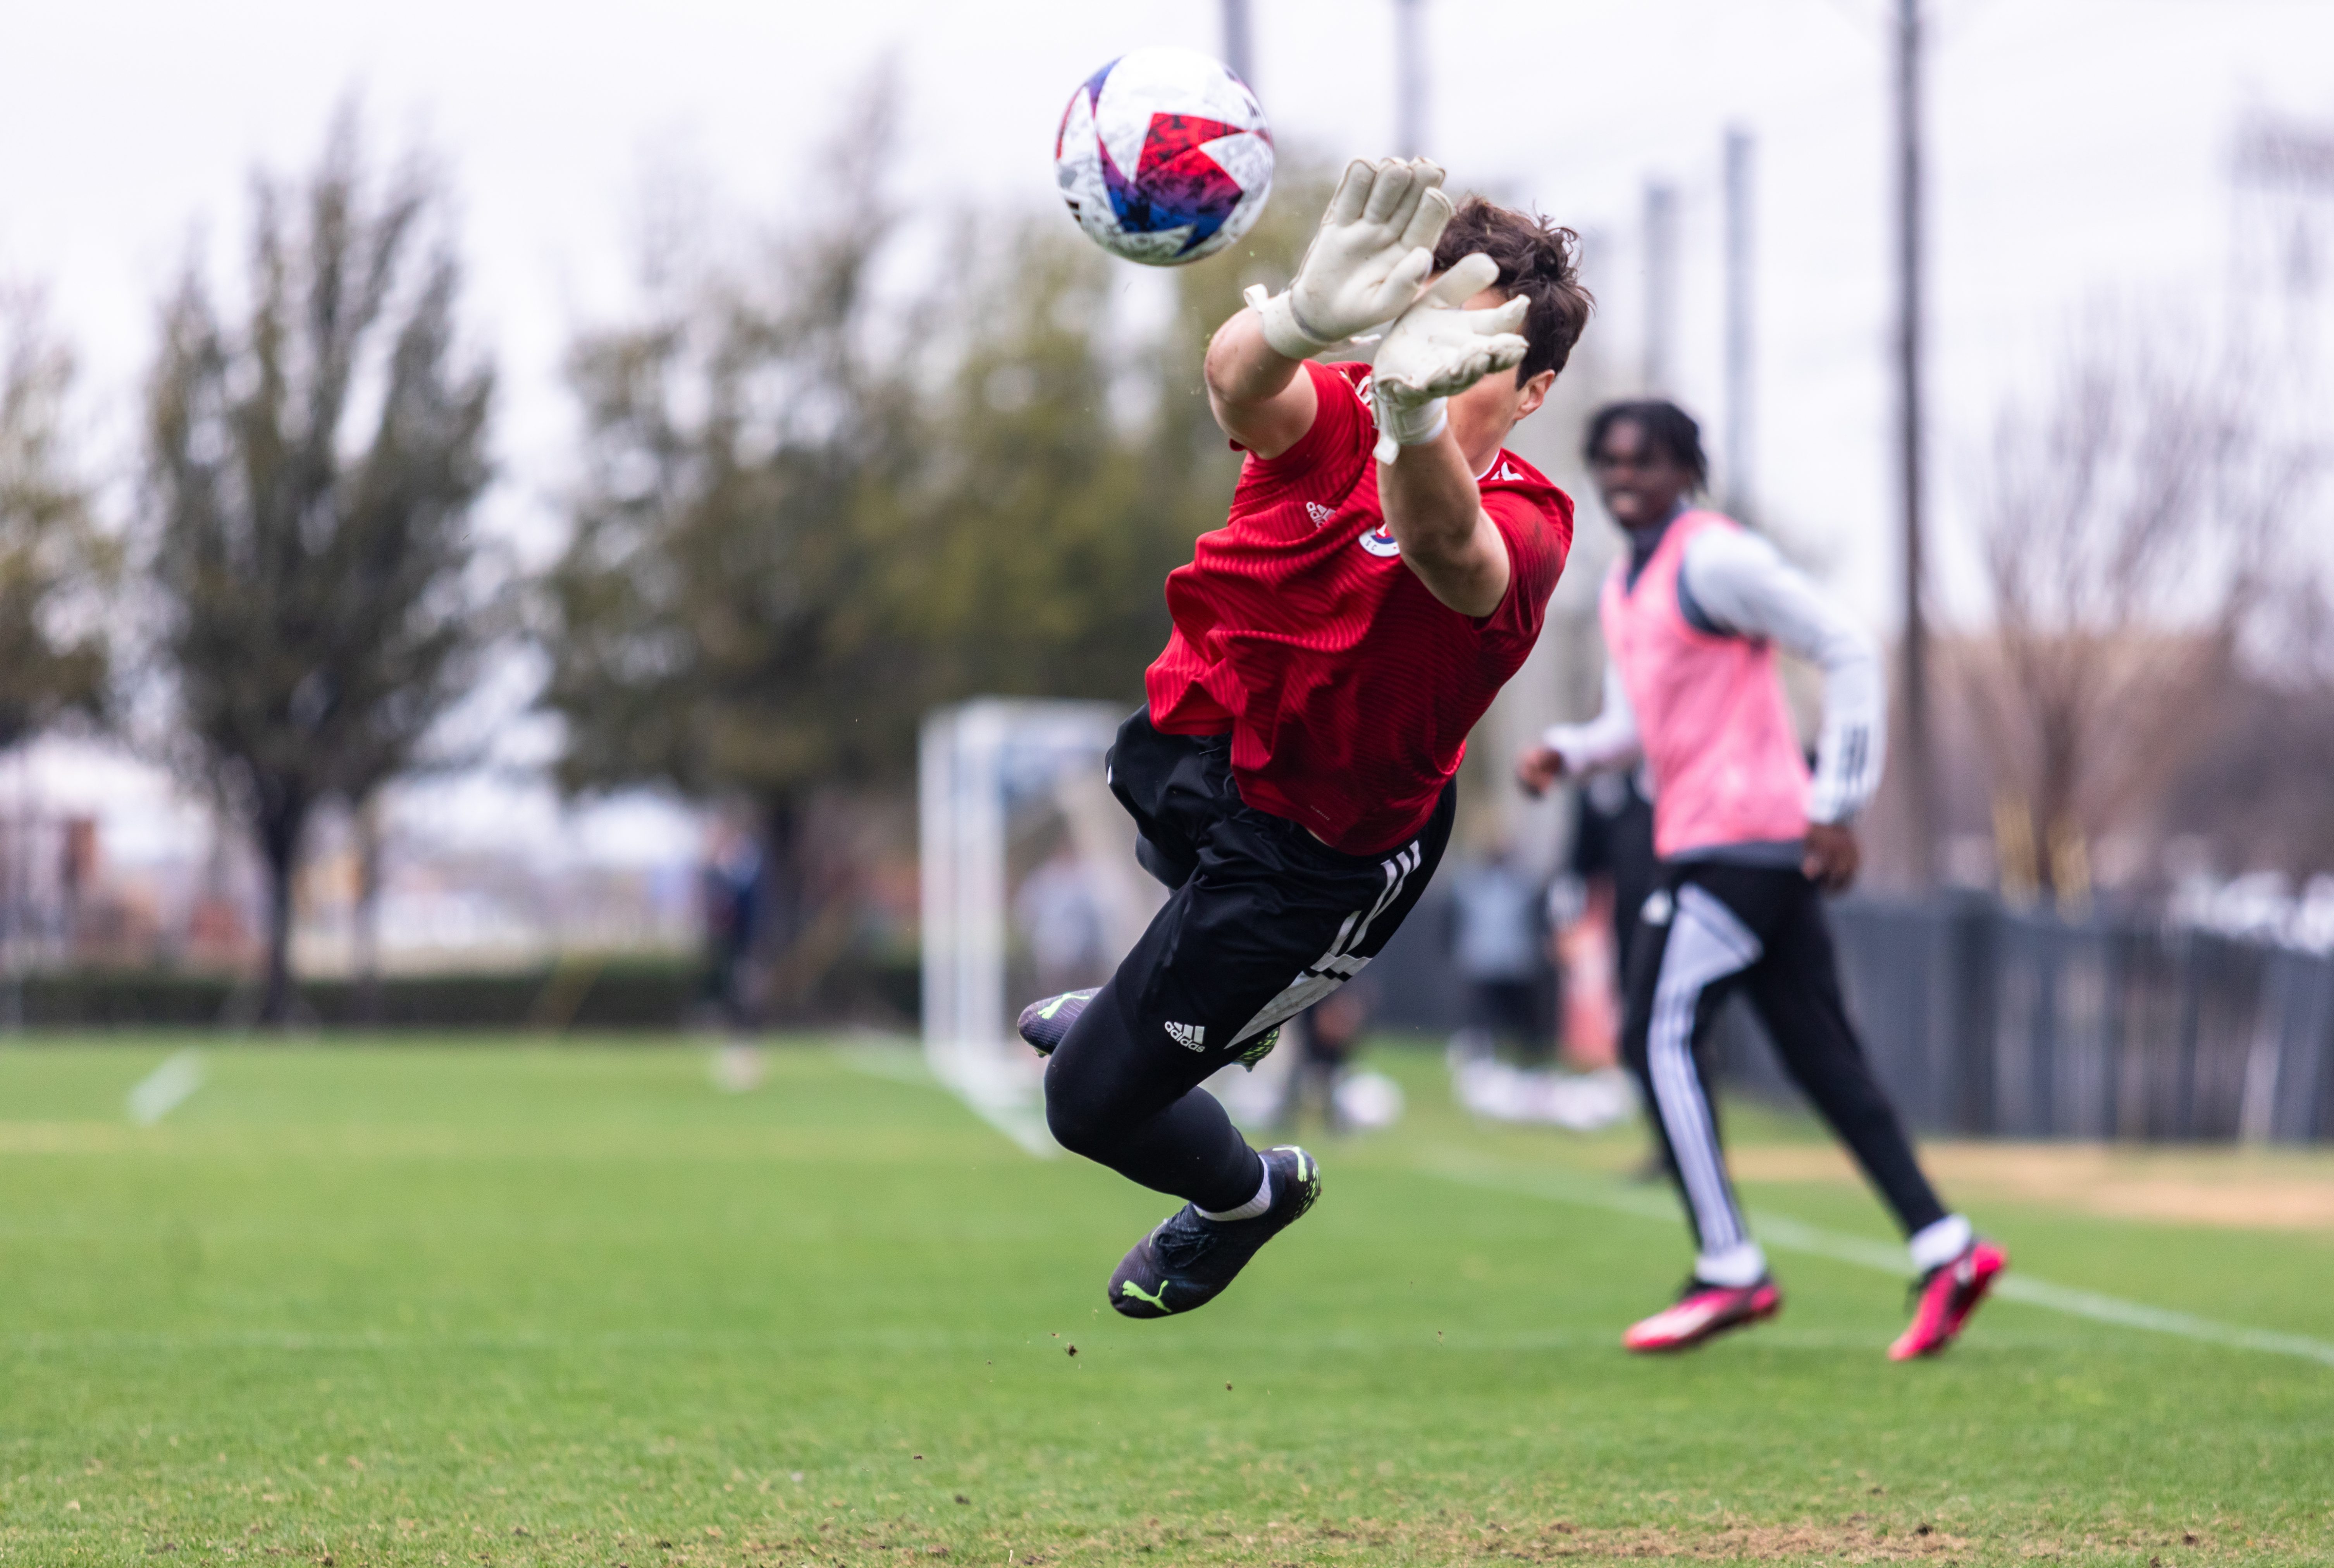 Michael Webber makes a save during North Texas SC training. (Courtesy North Texas SC)